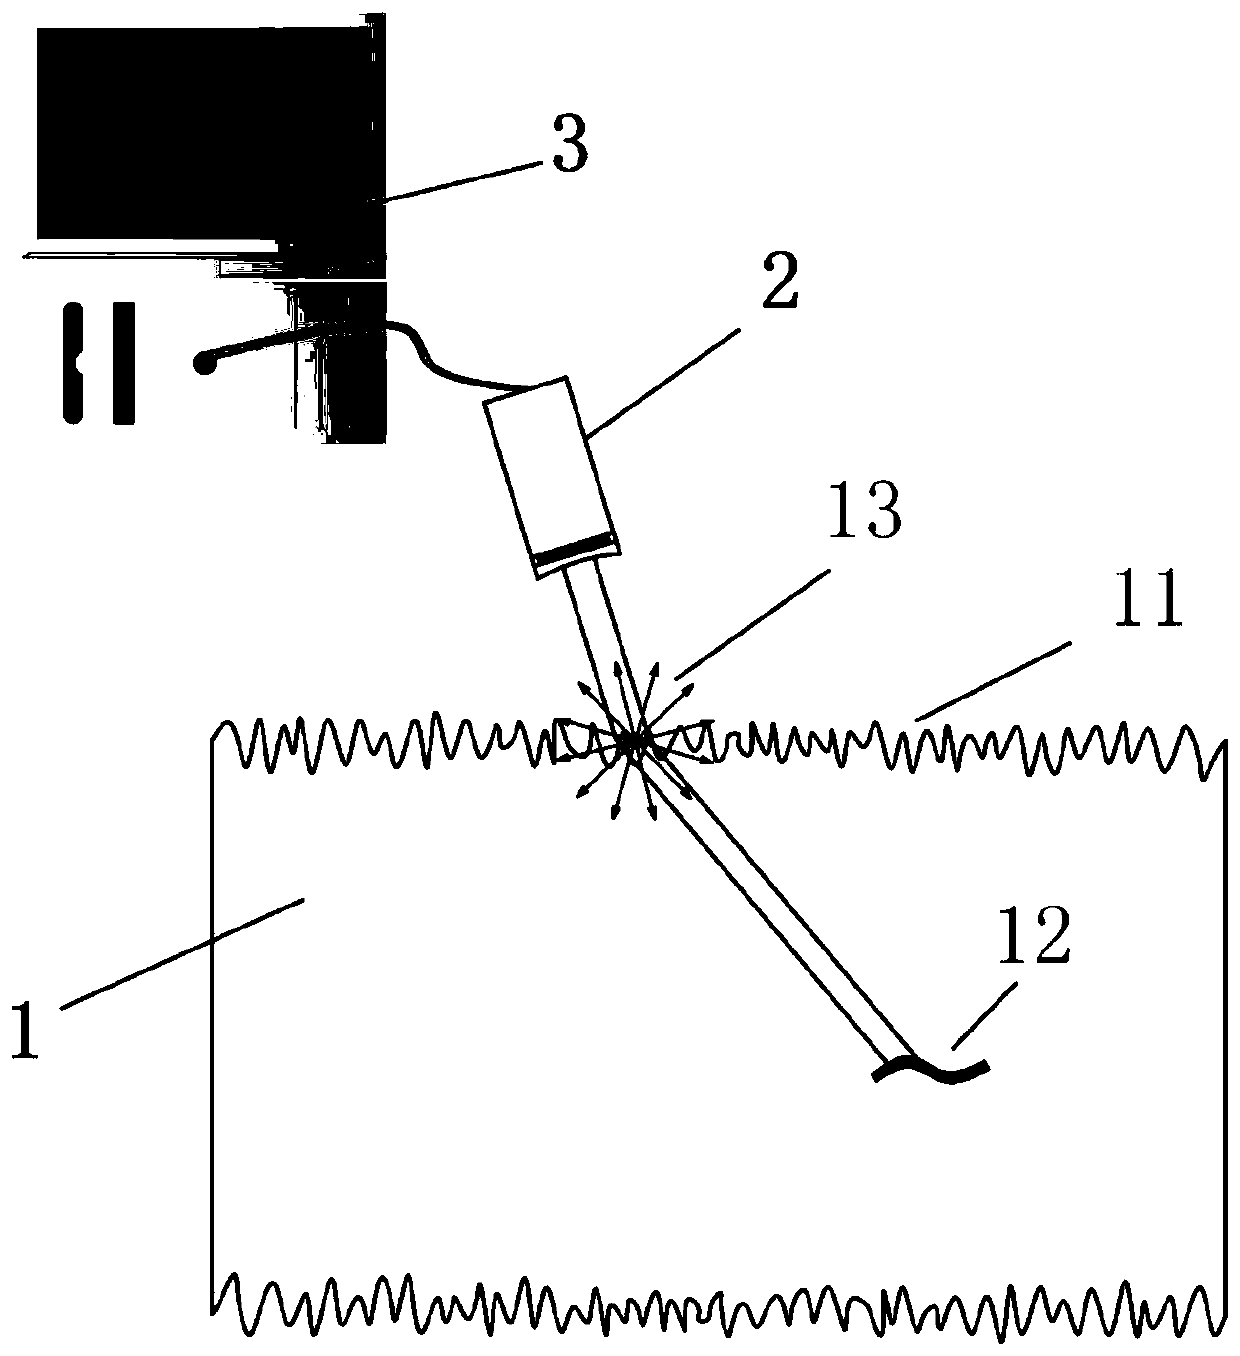 Micro-defect ultrasonic detection signal processing method considering surface roughness